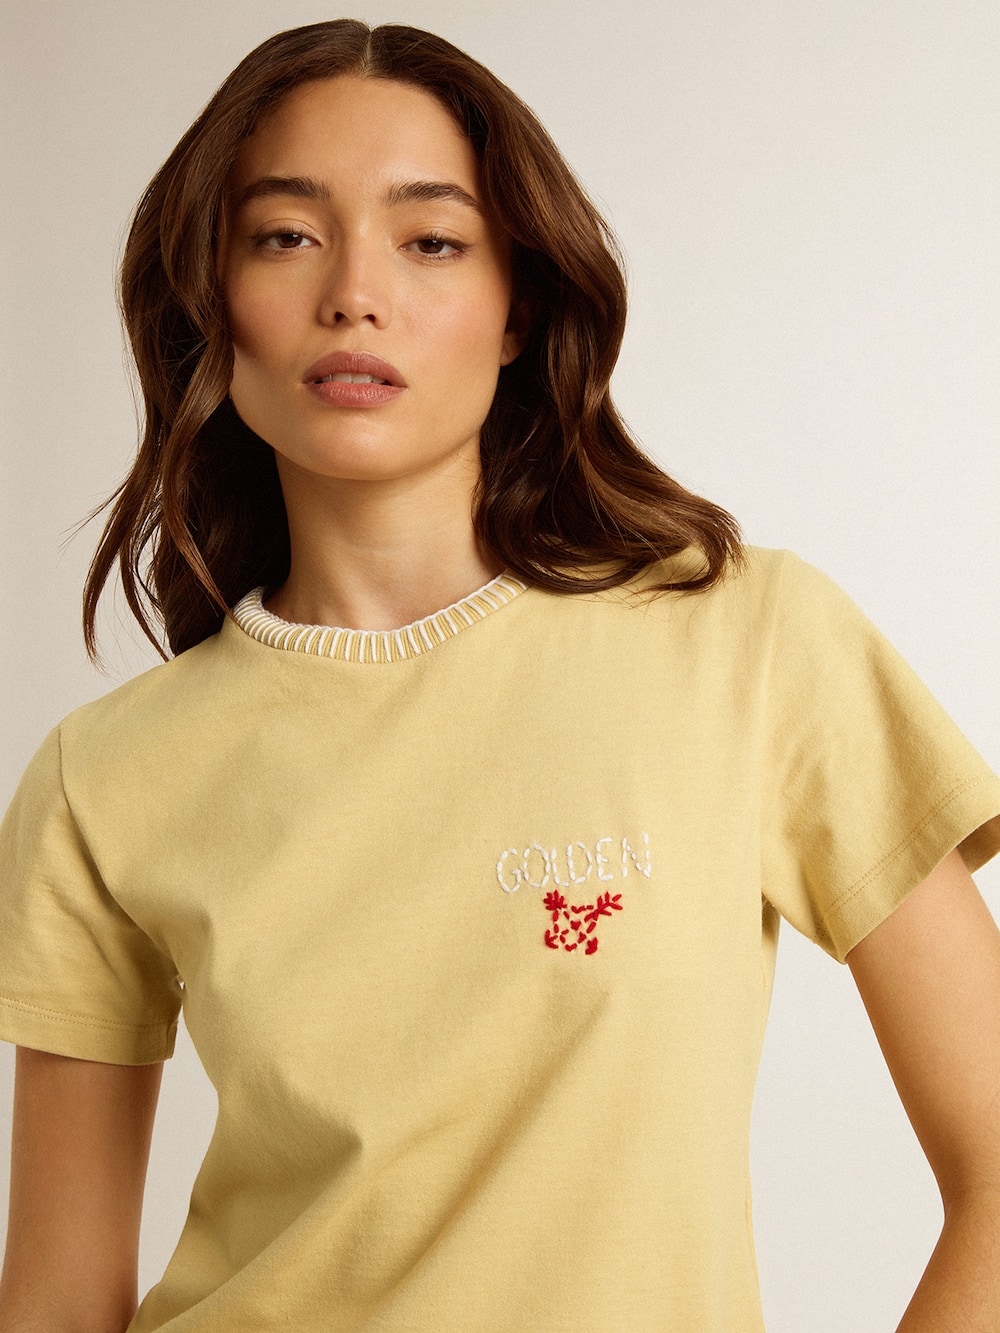 Golden Goose - Women's T-shirt in cotton jersey with embroidery on the neck and heart in 